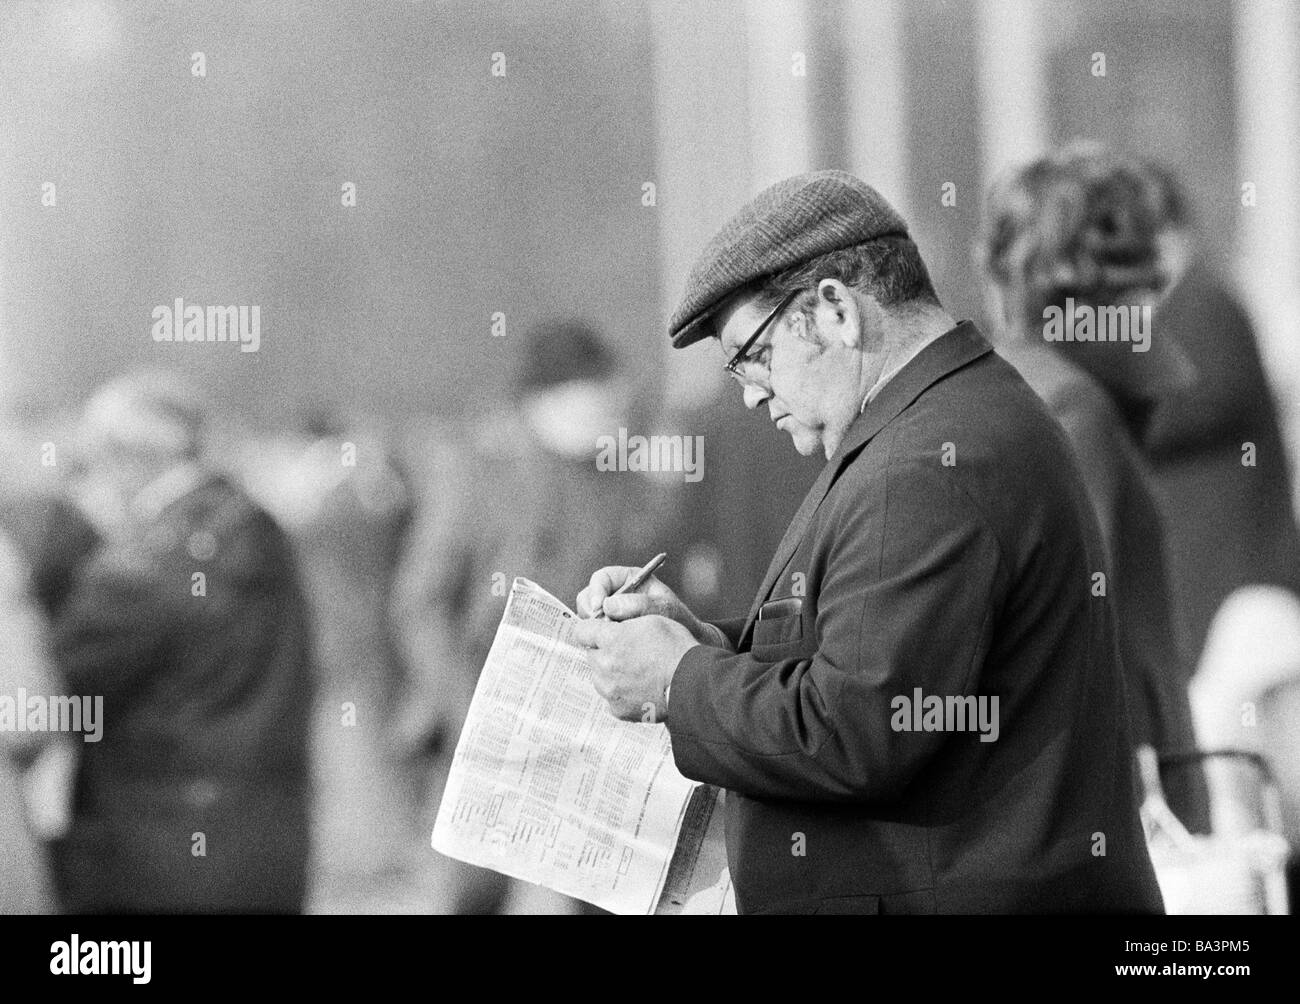 Seventies, black and white photo, sports, equestrianism, racecourse Dinslaken, trotting race 1973, horse-racing bet, man reads the racing sheet, aged 50 to 60 years, D-Dinslaken, Lower Rhine, Ruhr area, North Rhine-Westphalia Stock Photo